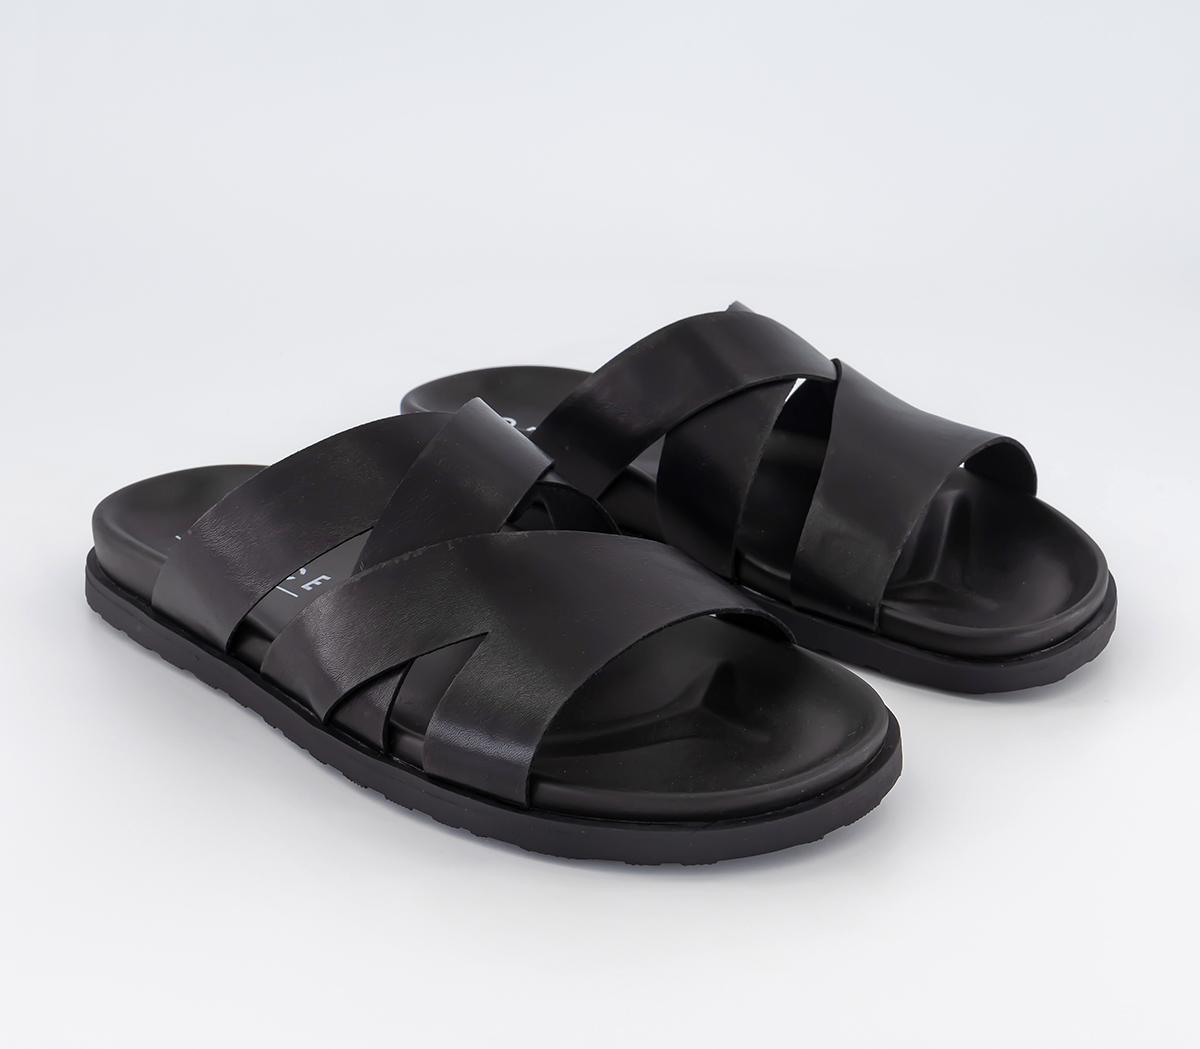 OFFICE Tahiti Multistrap Covered Footbeds Black - Men’s Sandals